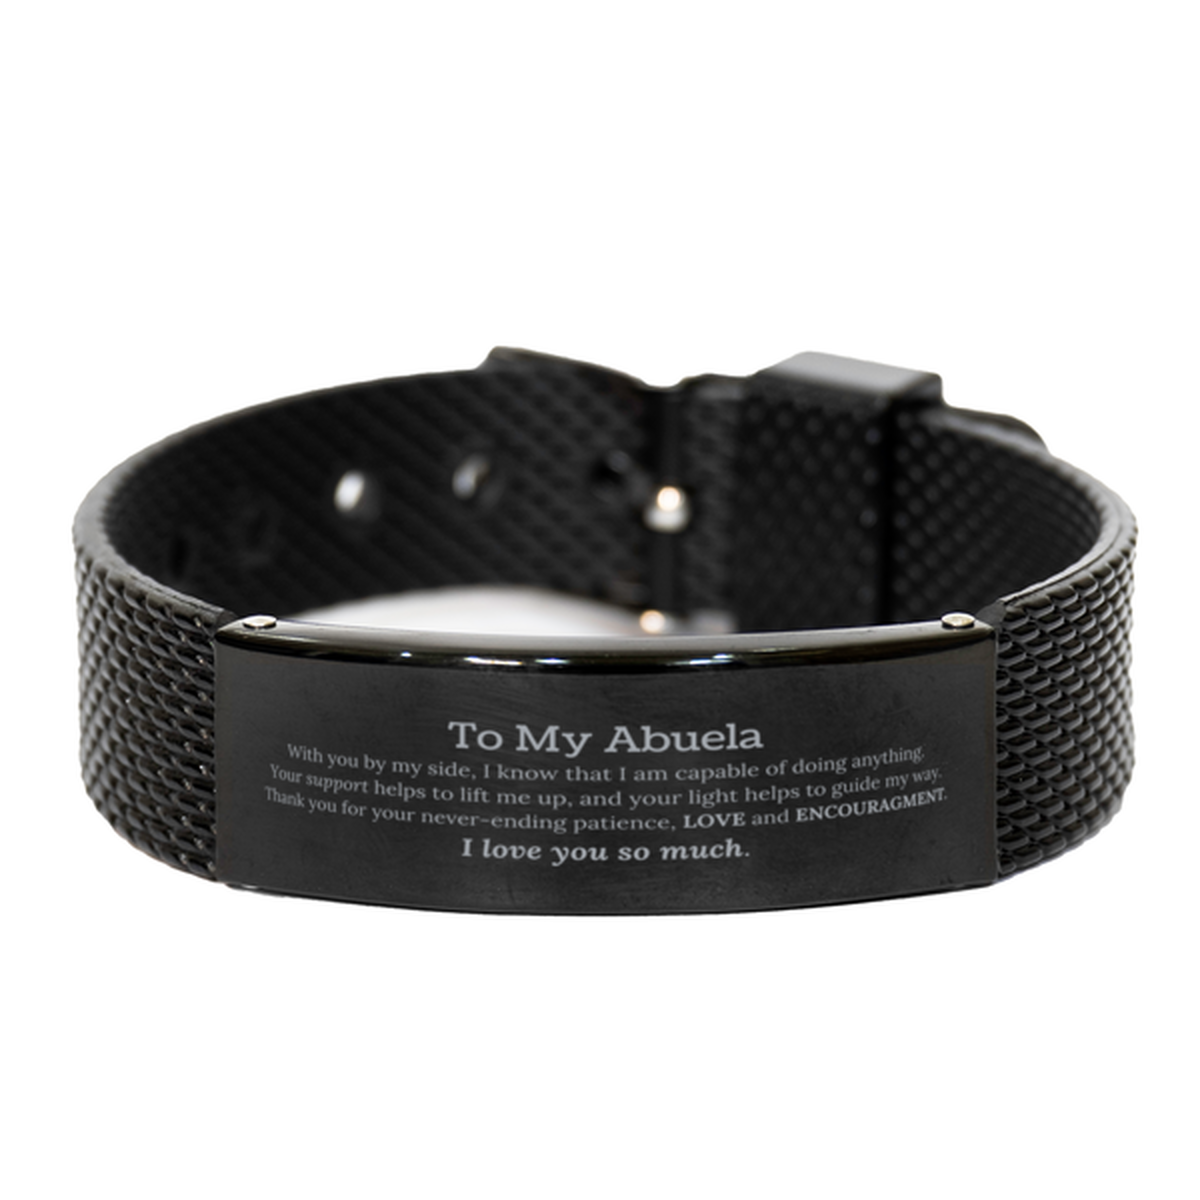 Appreciation Abuela Black Shark Mesh Bracelet Gifts, To My Abuela Birthday Christmas Wedding Keepsake Gifts for Abuela With you by my side, I know that I am capable of doing anything. I love you so much